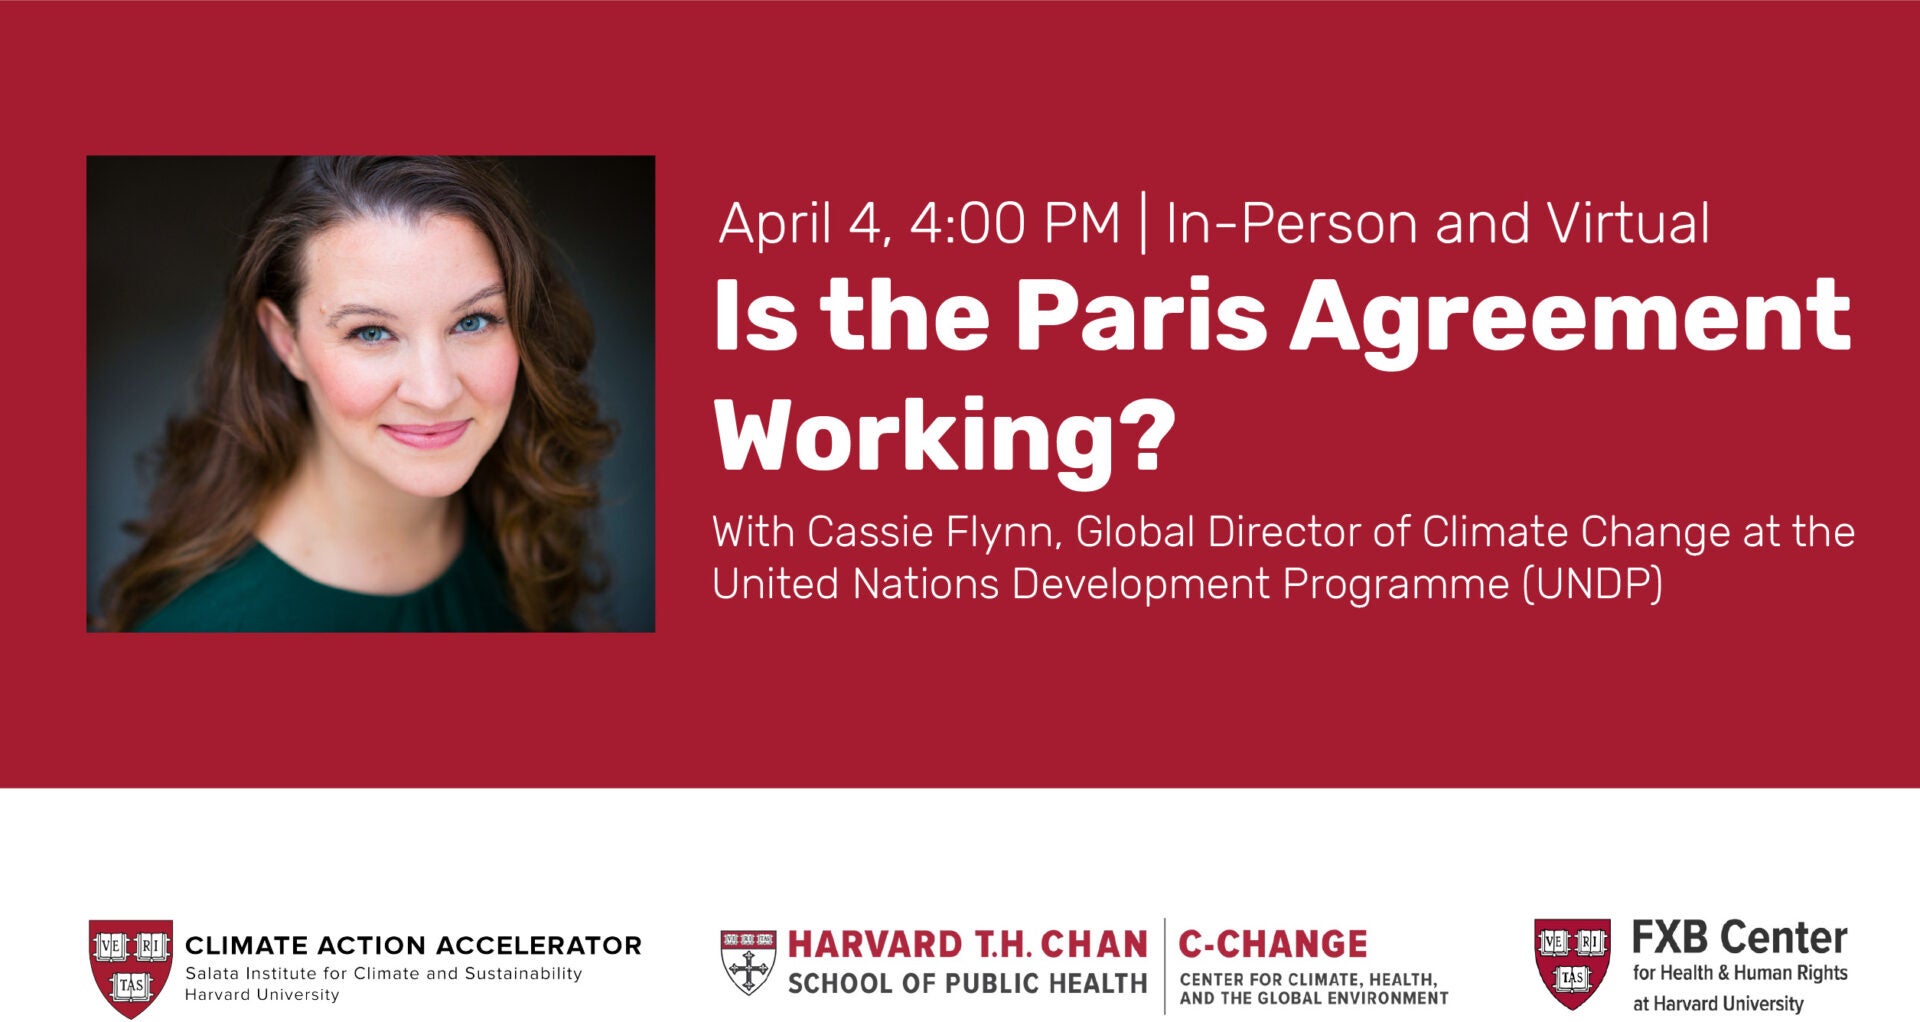 April 4, 4:00pm, In-person and virtual. Is the Paris Agreement Working? With Cassie Flynn, Global Director of Climate Change at the United Nations Development Programme (UNDP).